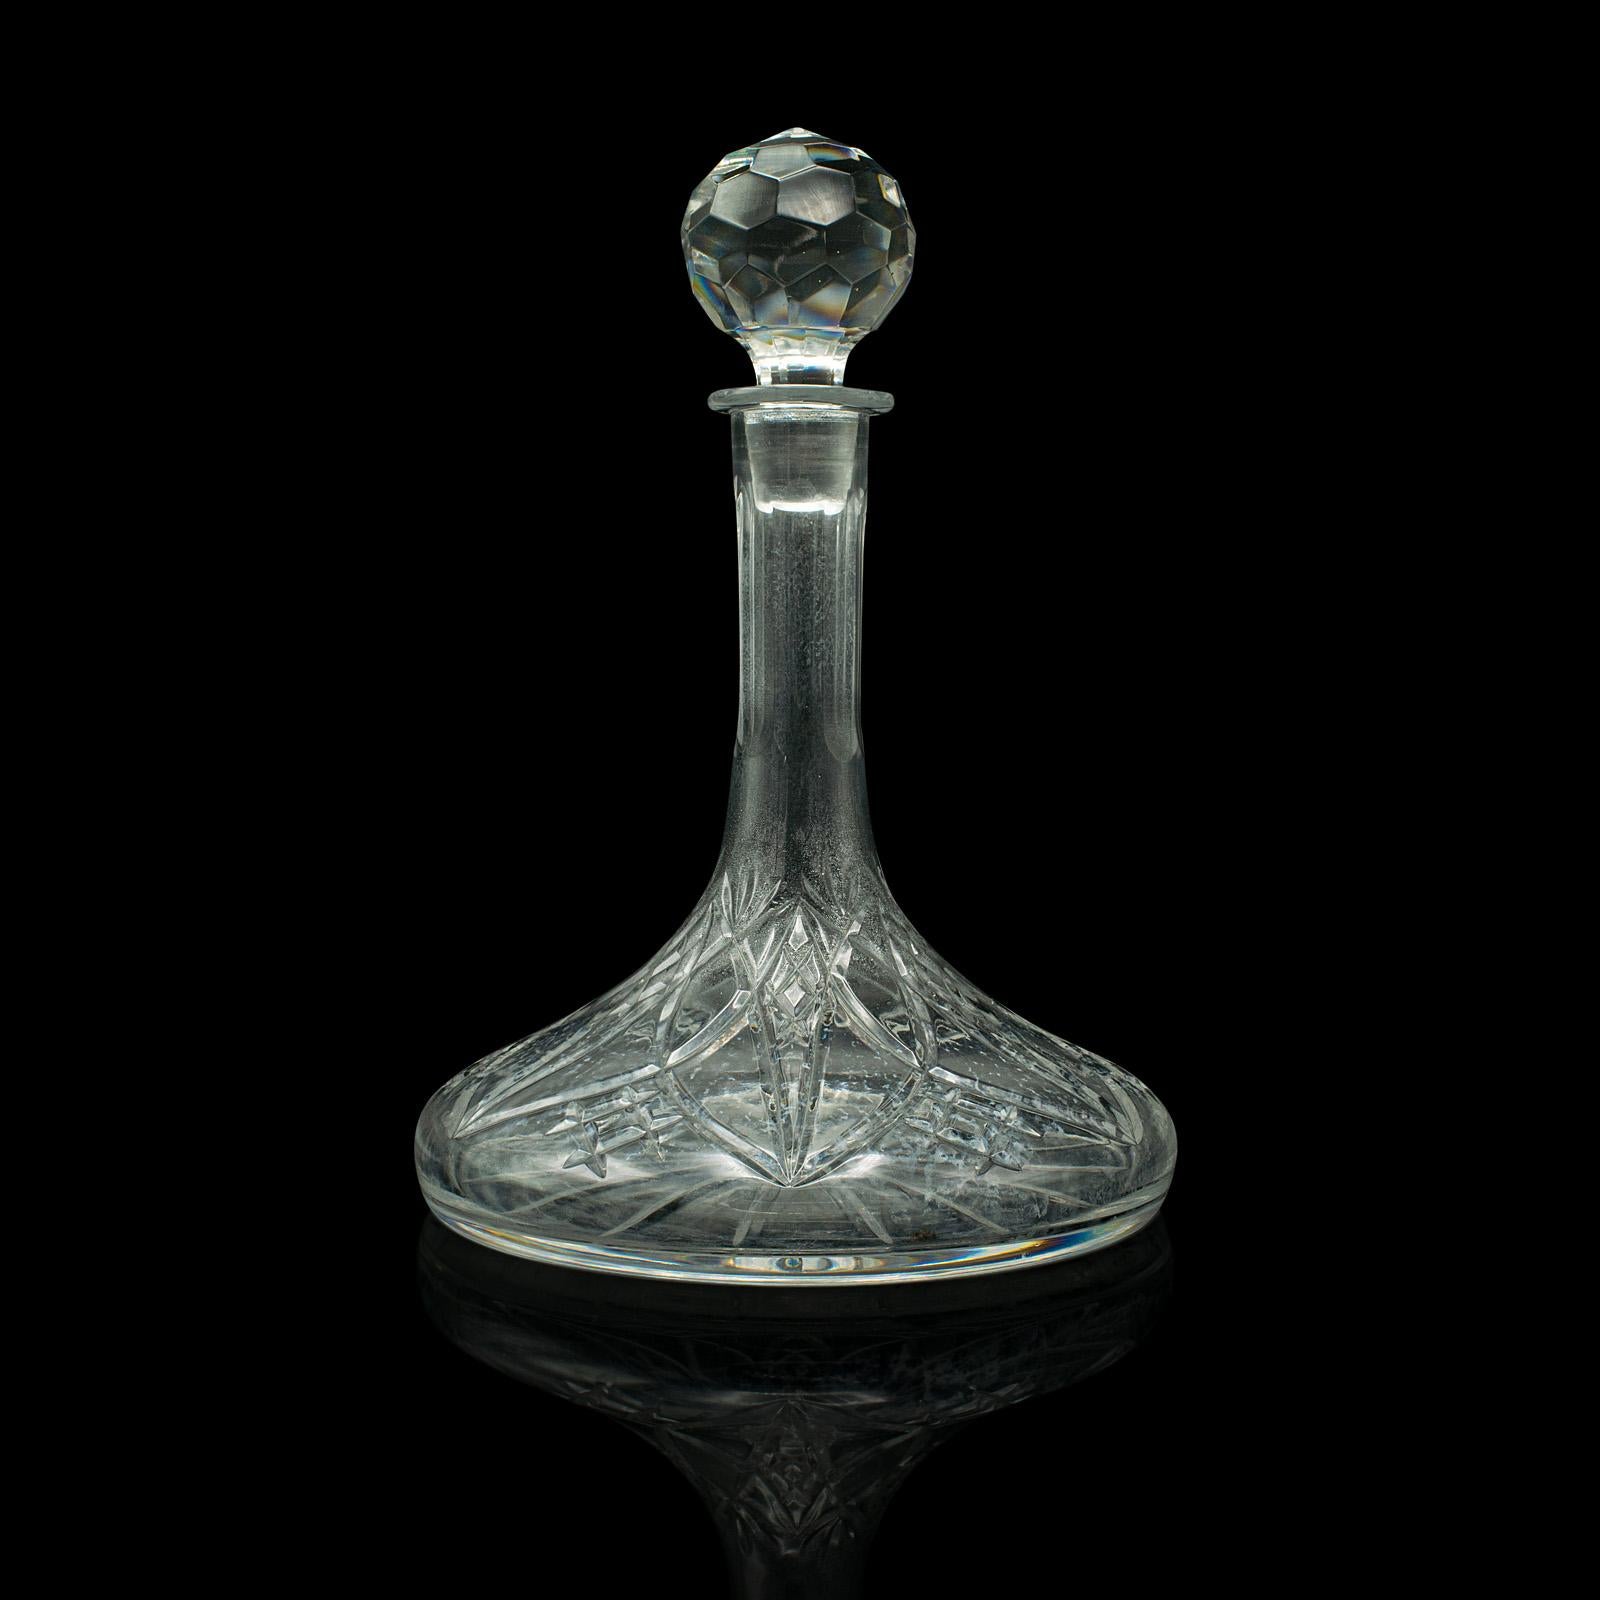 This is a vintage wine decanter. An English, cut glass decorative spirit vessel, dating to the early 20th century, circa 1930.

Striking form and patterns accentuate this appealing decanter
Displays a desirable aged patina and in good order
Quality